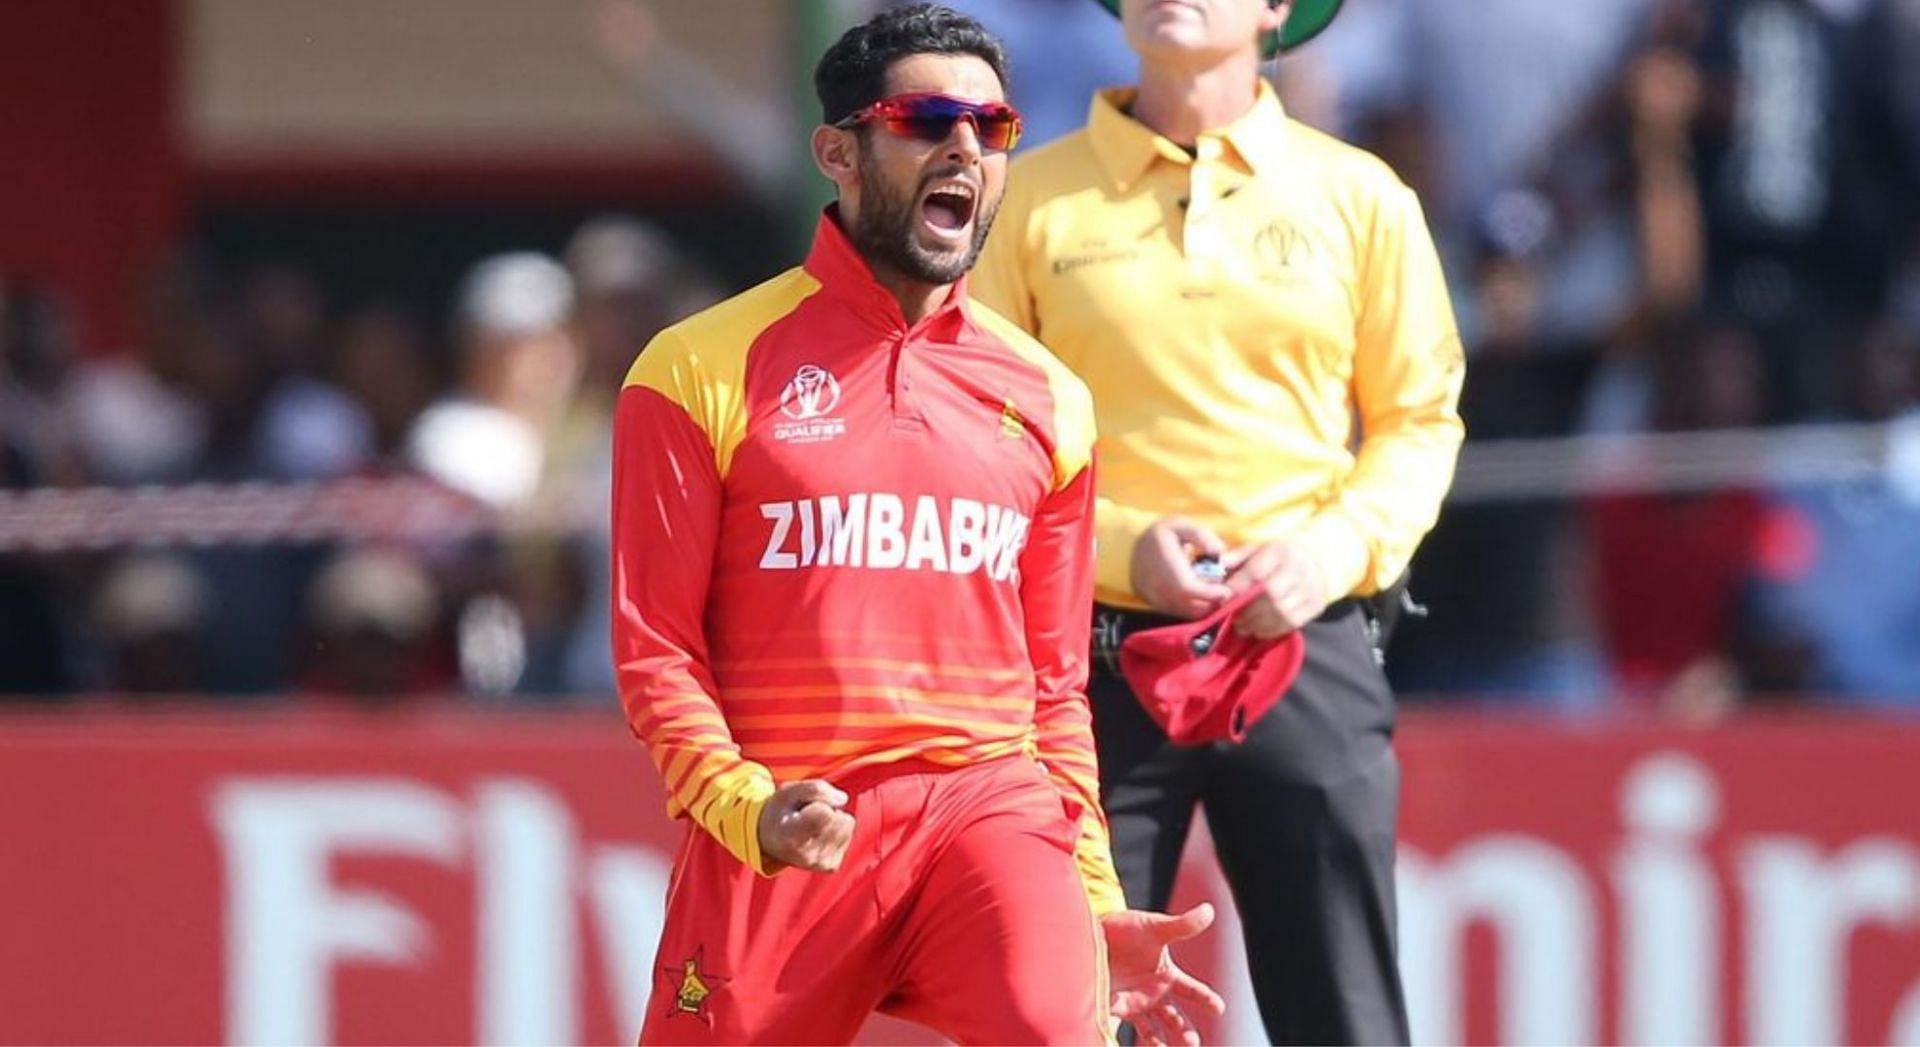 IND vs ZIM 2022: "We're going to watch the footage (of India's players) and analyze" - Sikander Raza warns India ahead of ODI series